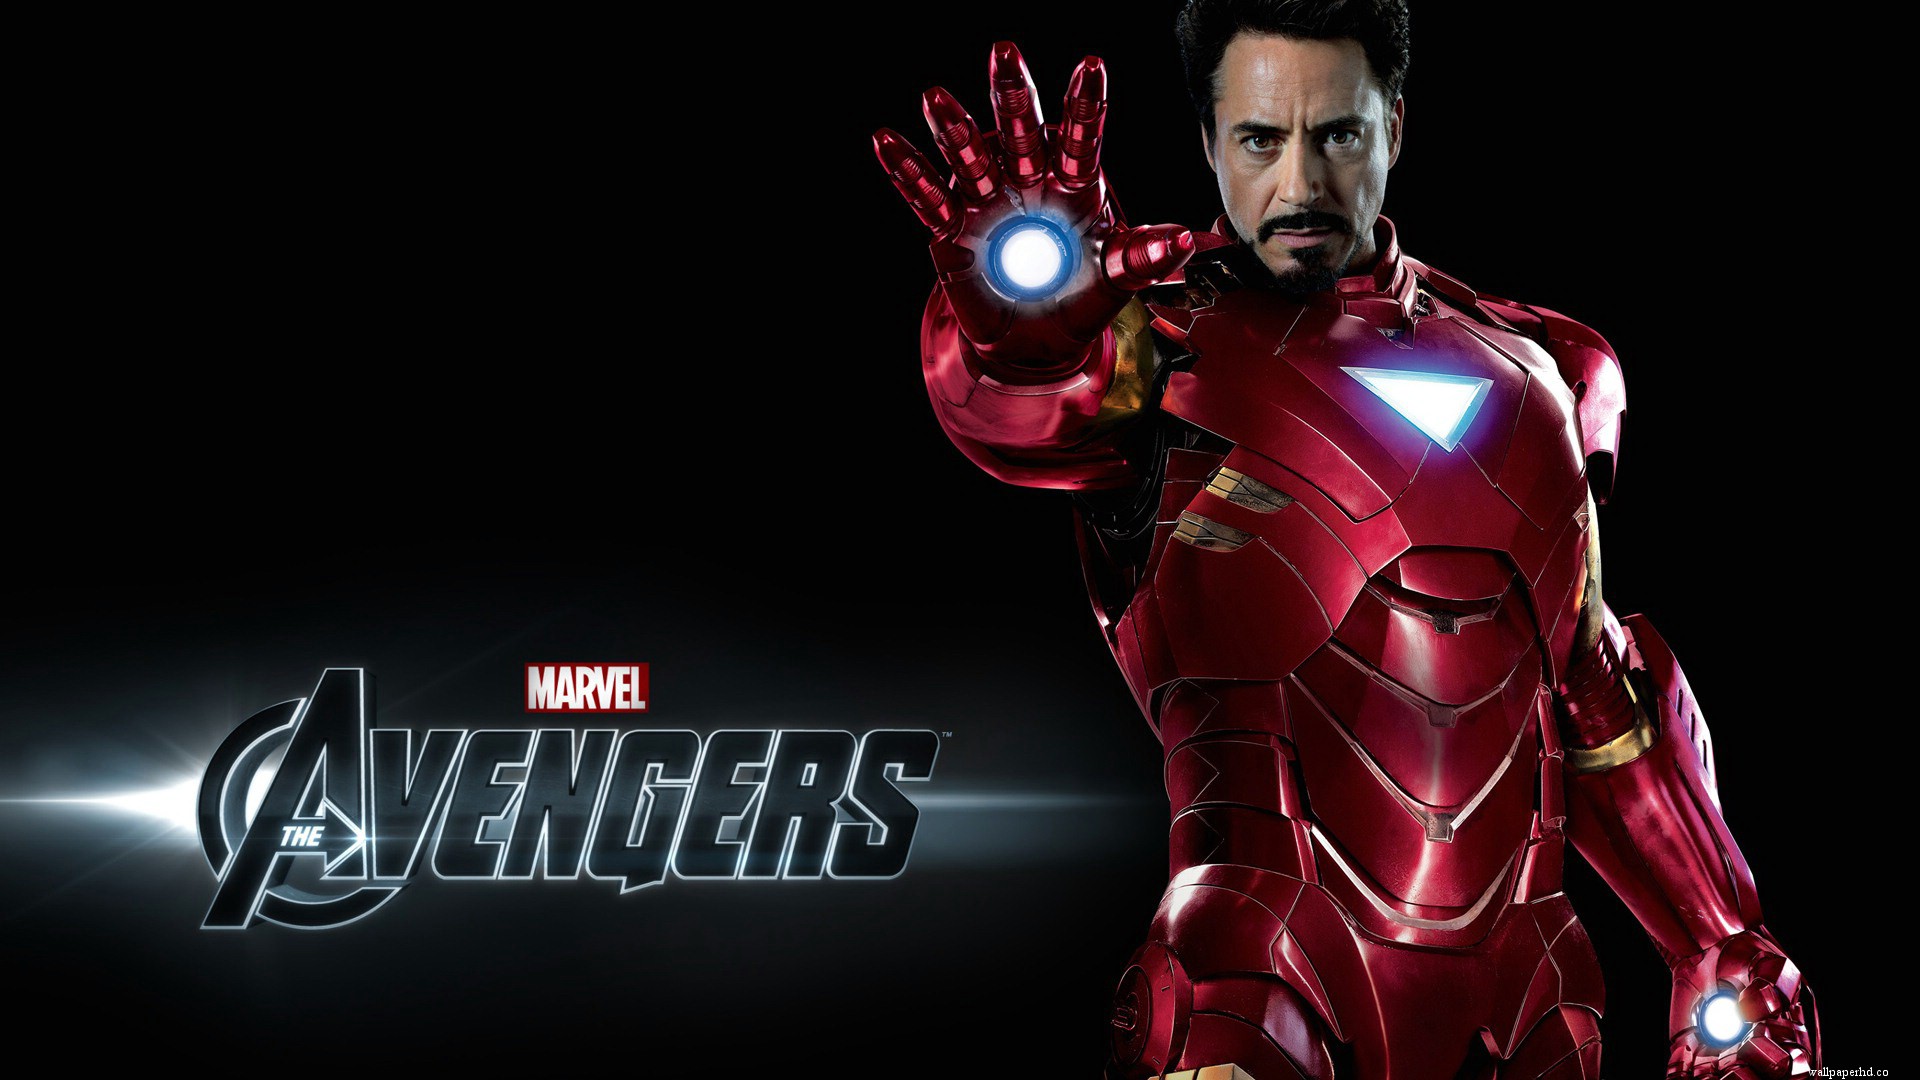  Wallpapers HD Movie Wallpapers The Avengers Wallpapers 16 1920x1080